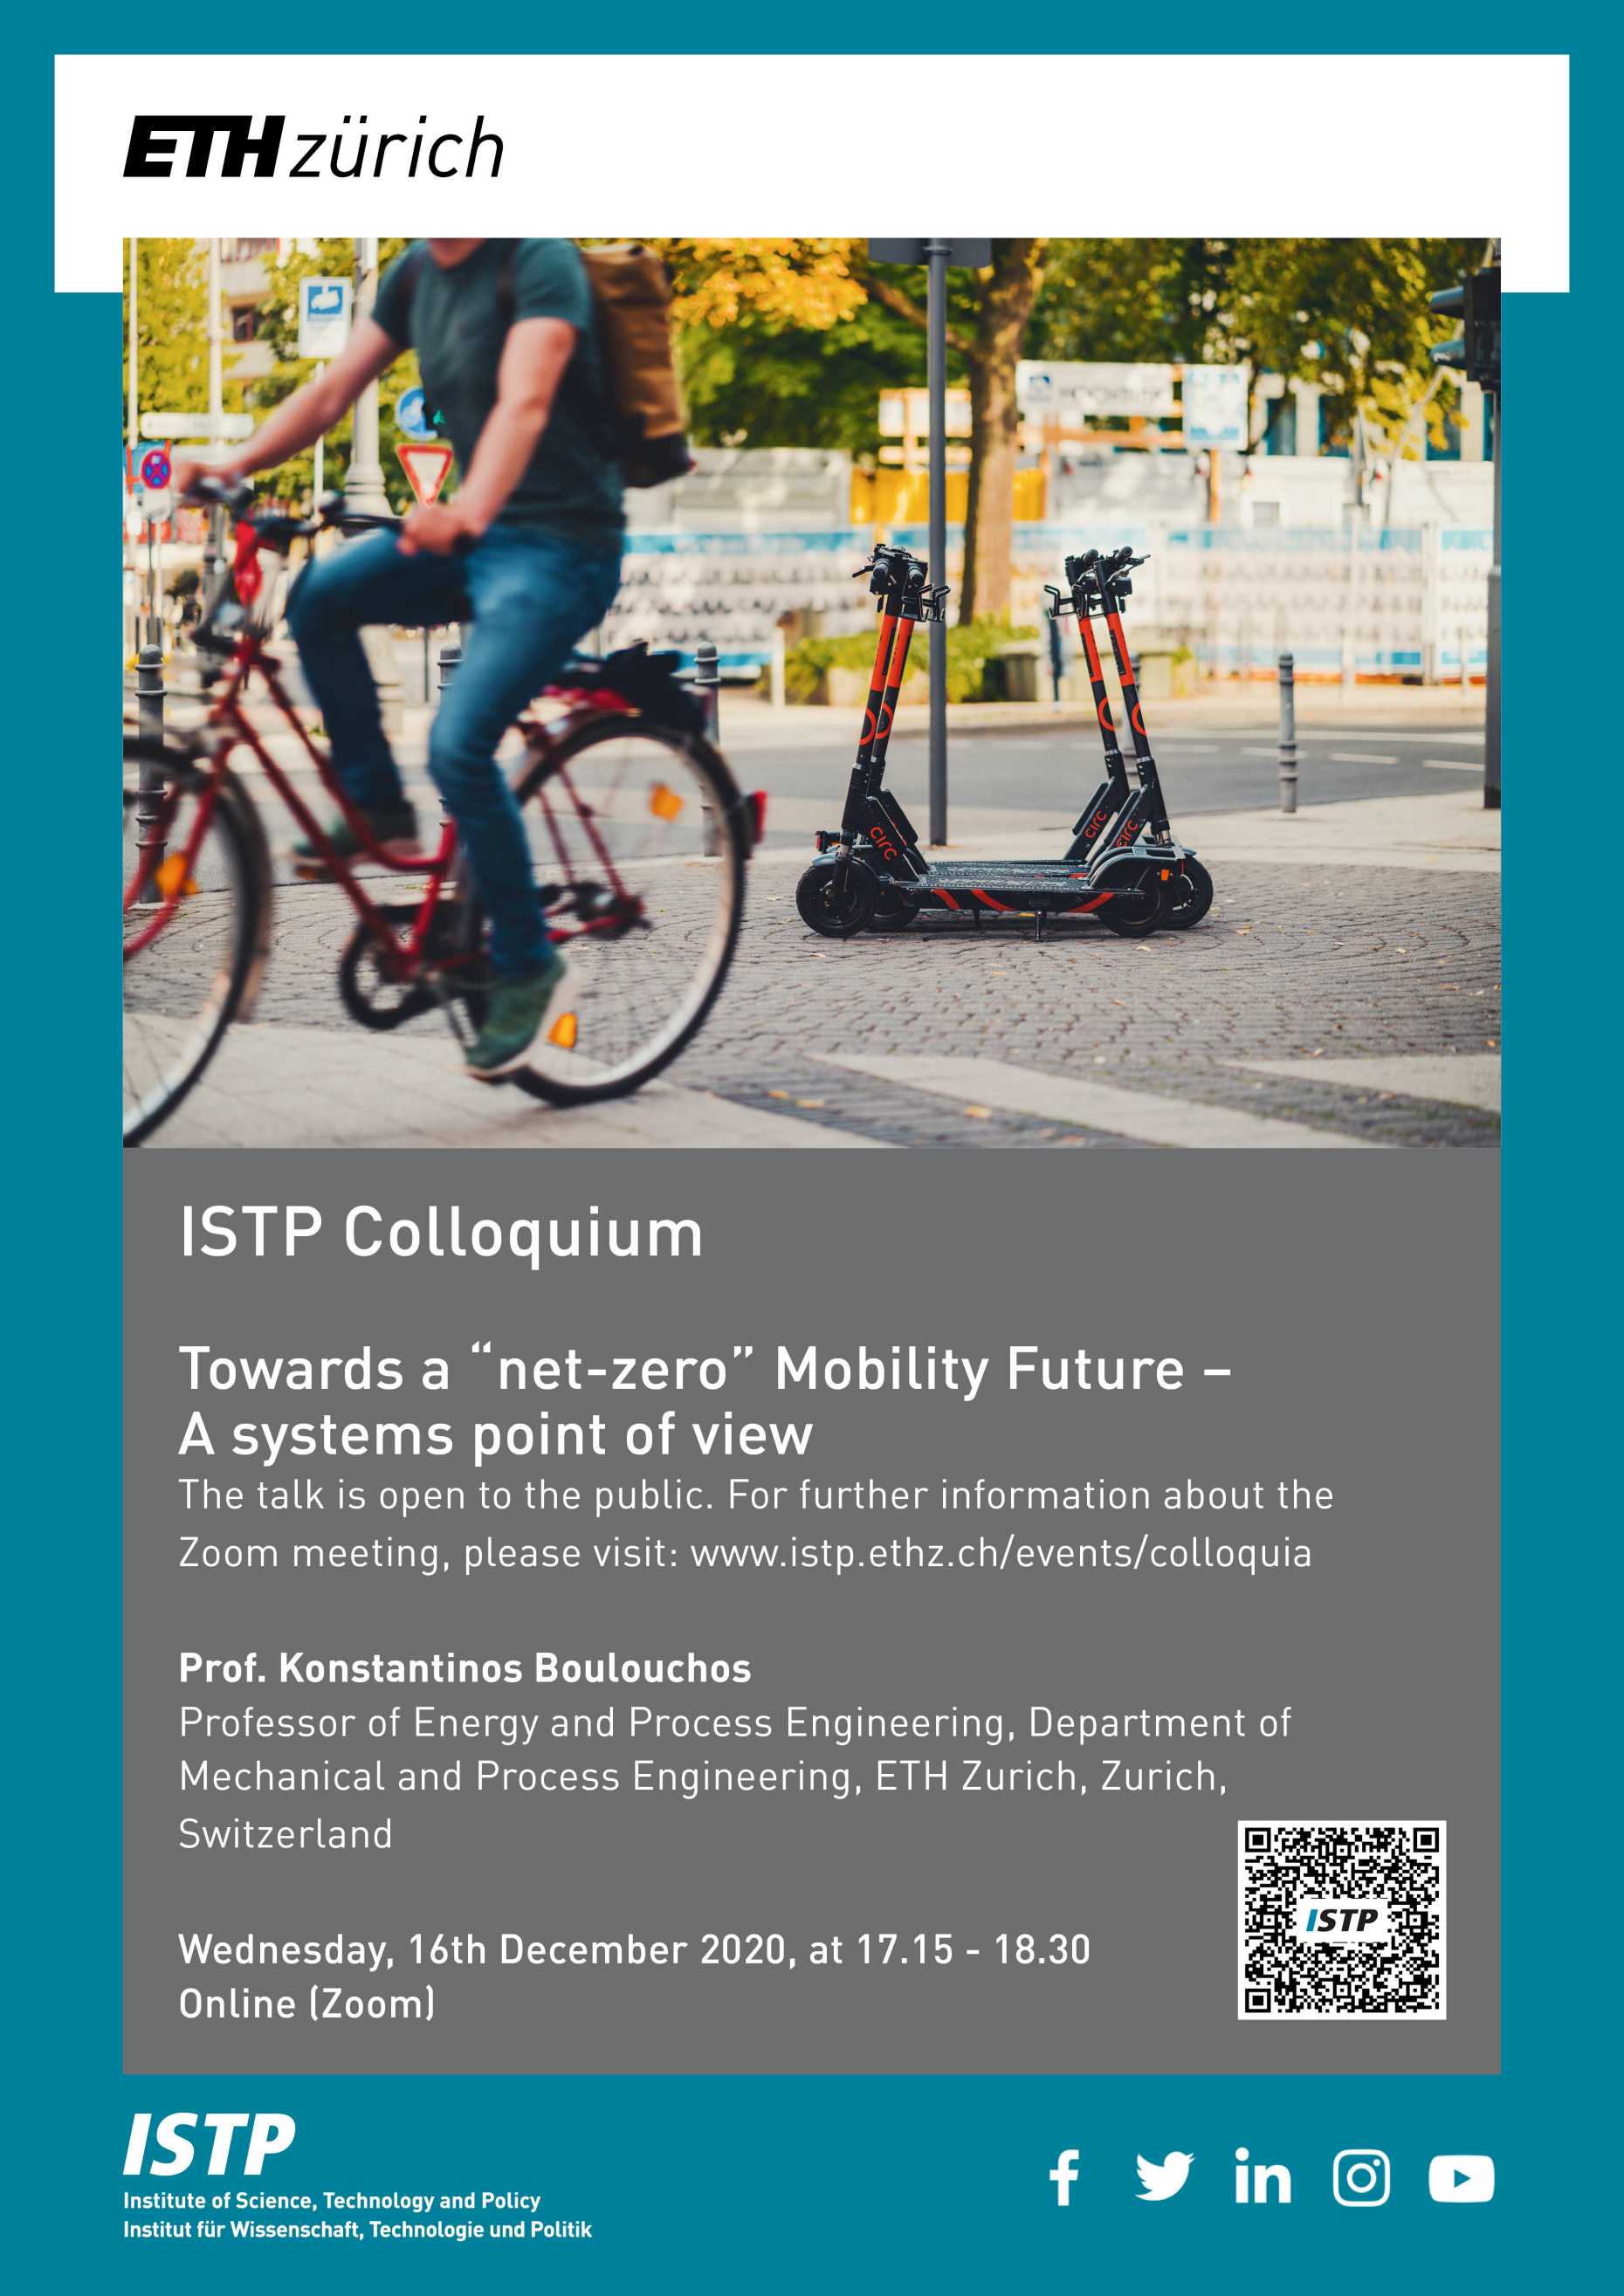 ISTP Colloquium: Towards a "net-zero" Mobility Future – A systems point of view